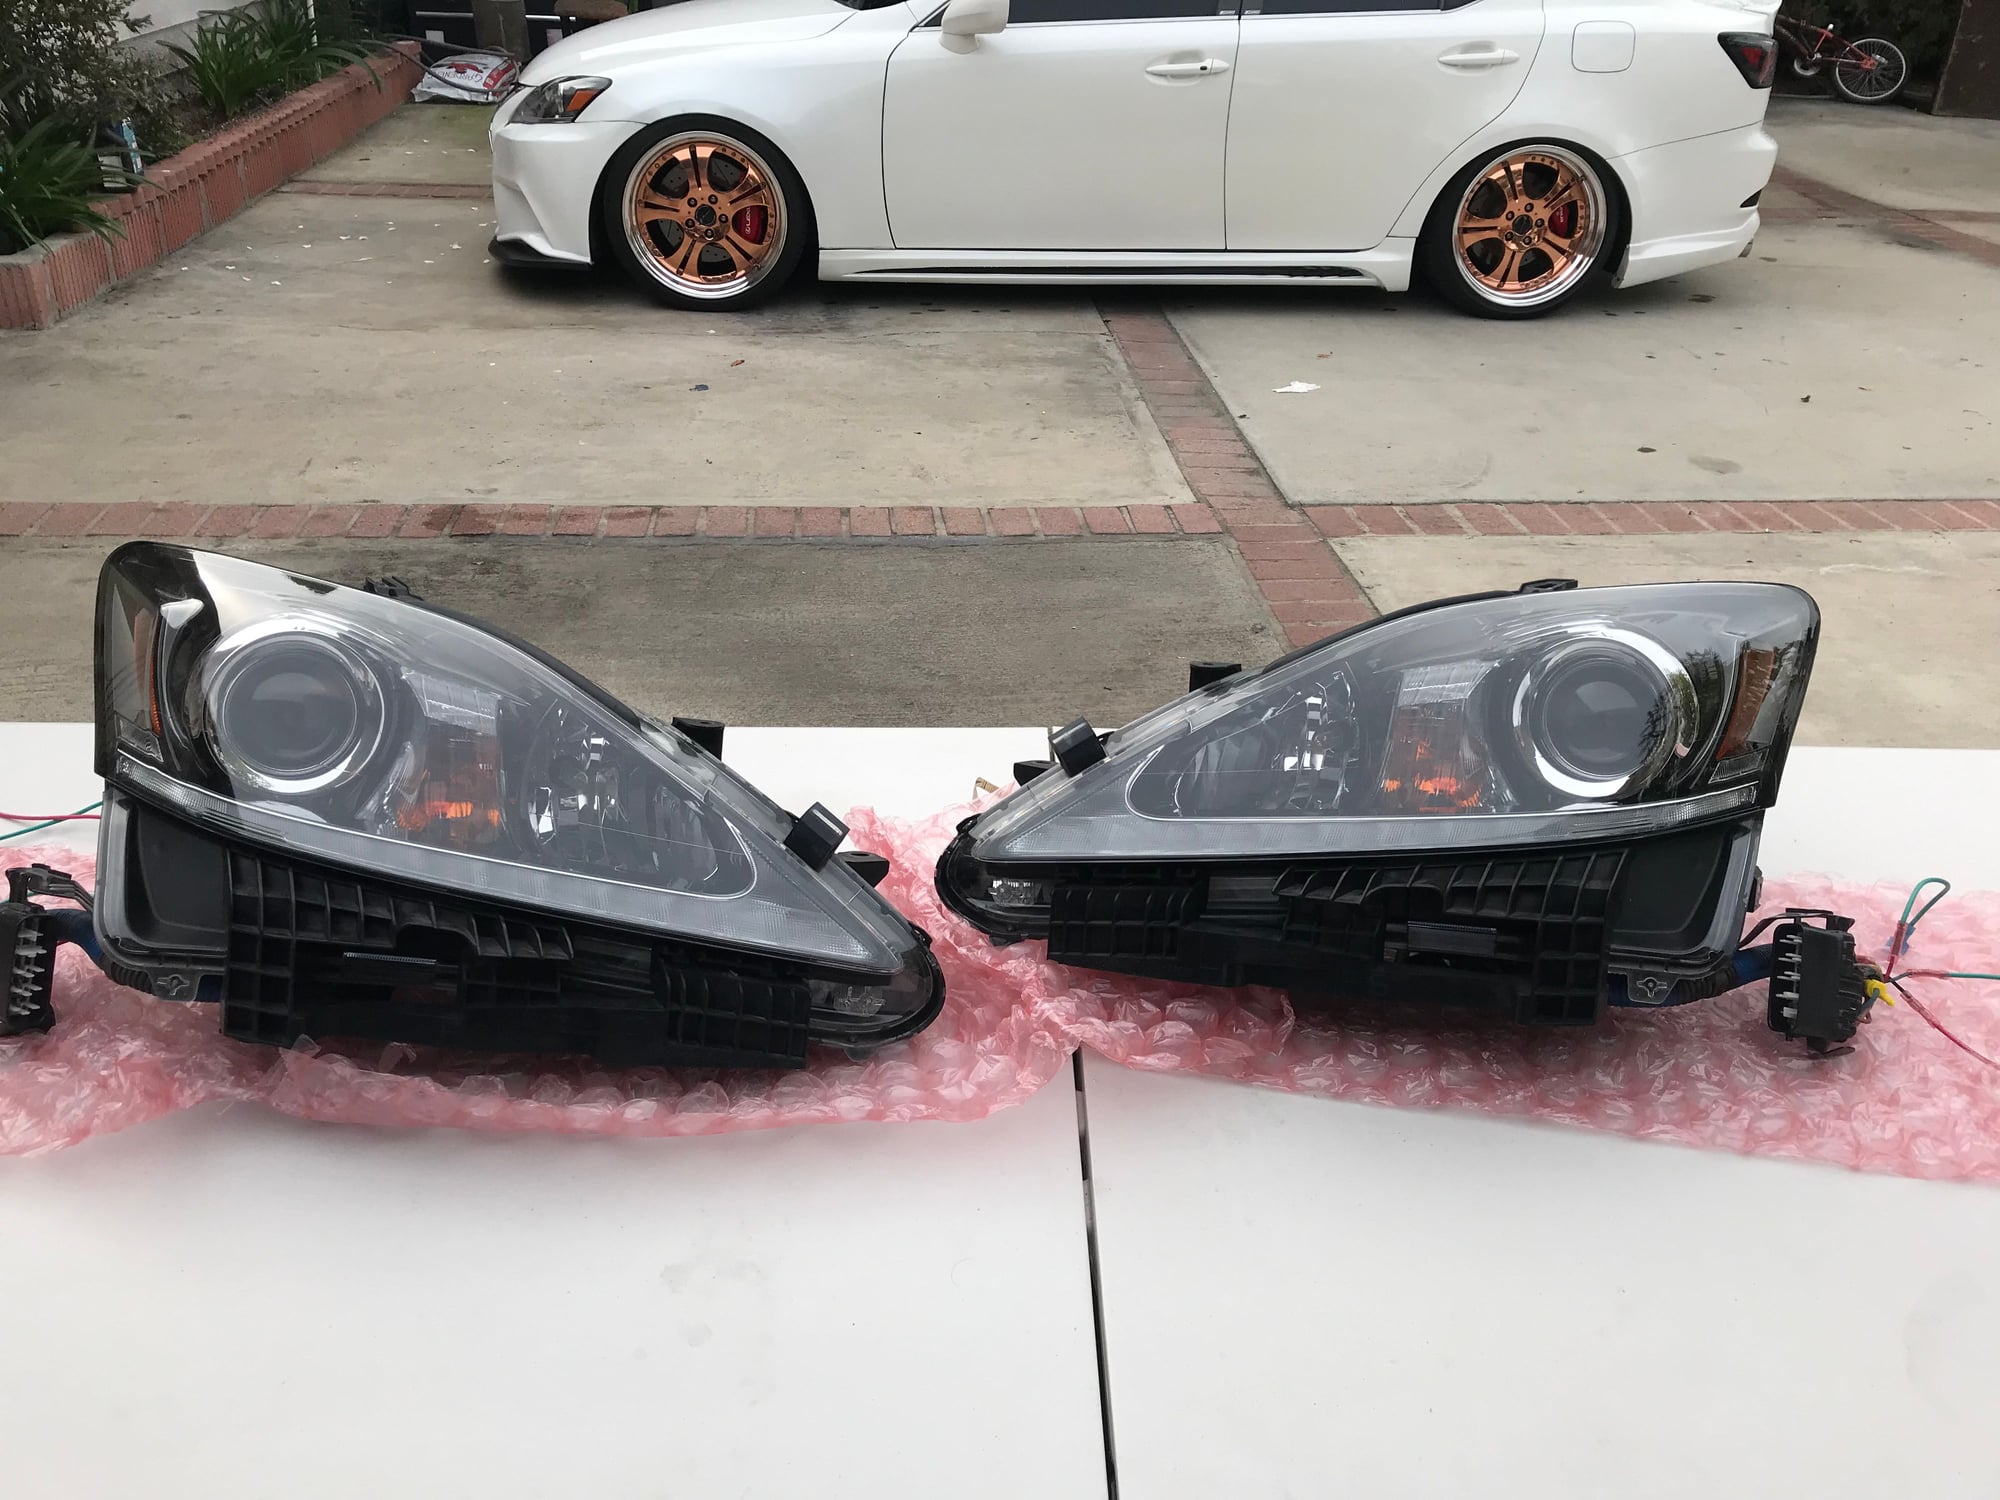 Lights - 2012 oem led headlight in great condition - Used - 2006 to 2014 Lexus IS350 - 2006 to 2014 Lexus IS250 - 2008 to 2014 Lexus IS F - Garden Grove, CA 92840, United States